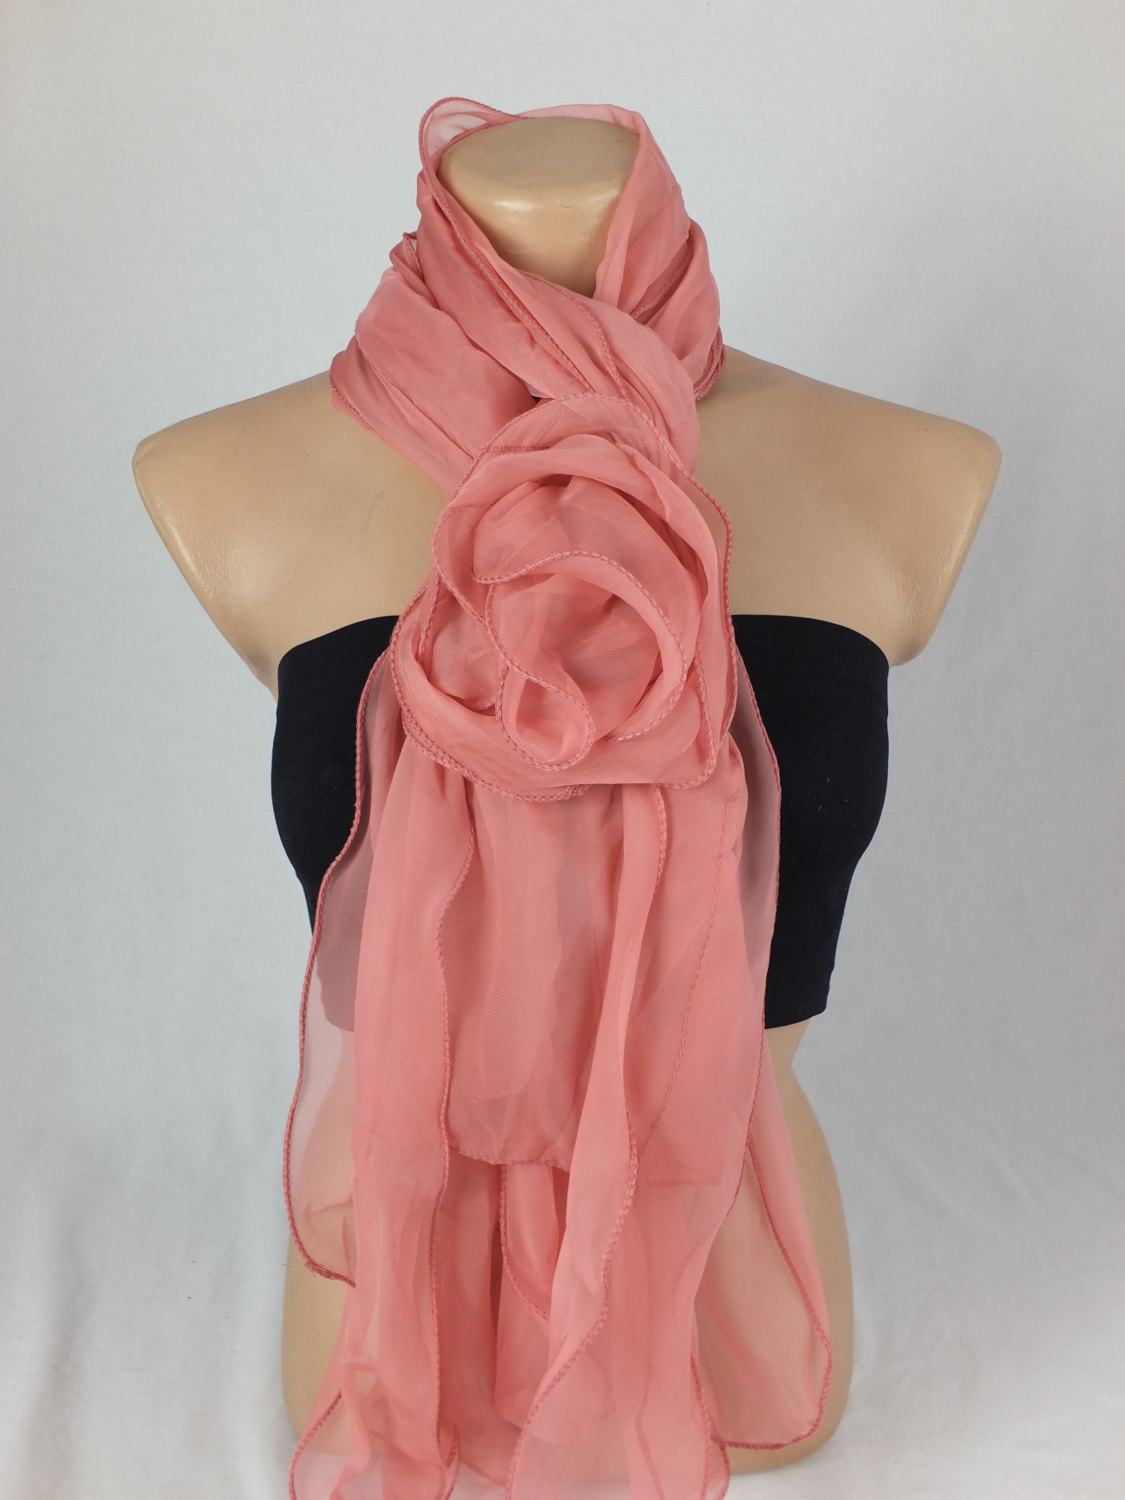 Salmon Scarf Shawl ,pinky 3d Rose Scarf Shawl, Ruffled Woman Scarf, Christmas Gift, Gift For Her